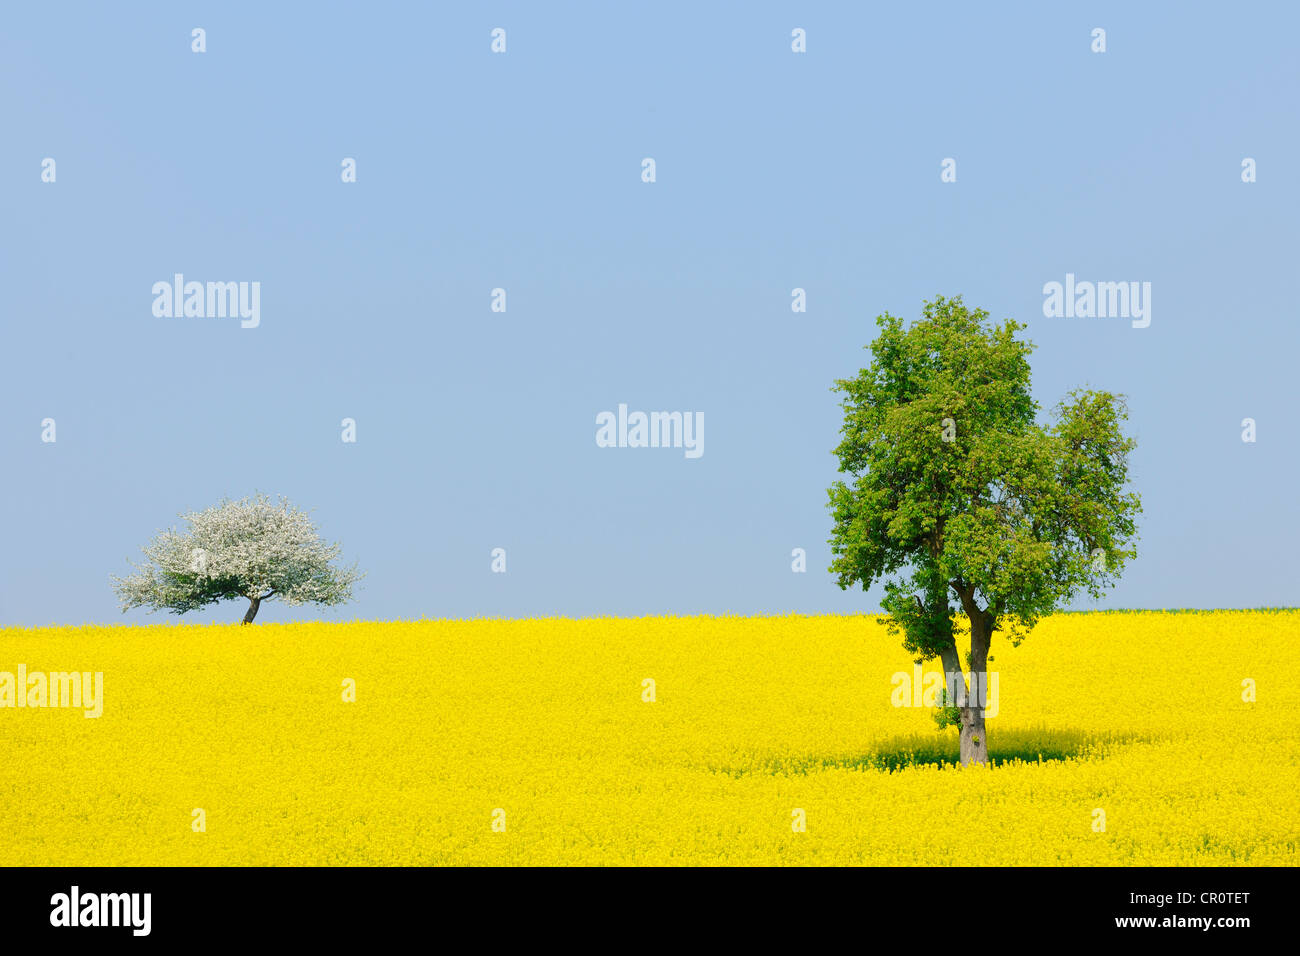 Pear tree (Pyrus) and a flowering apple tree (Malus) in a canola field, Lower Franconia, Bavaria, Germany, Europe Stock Photo